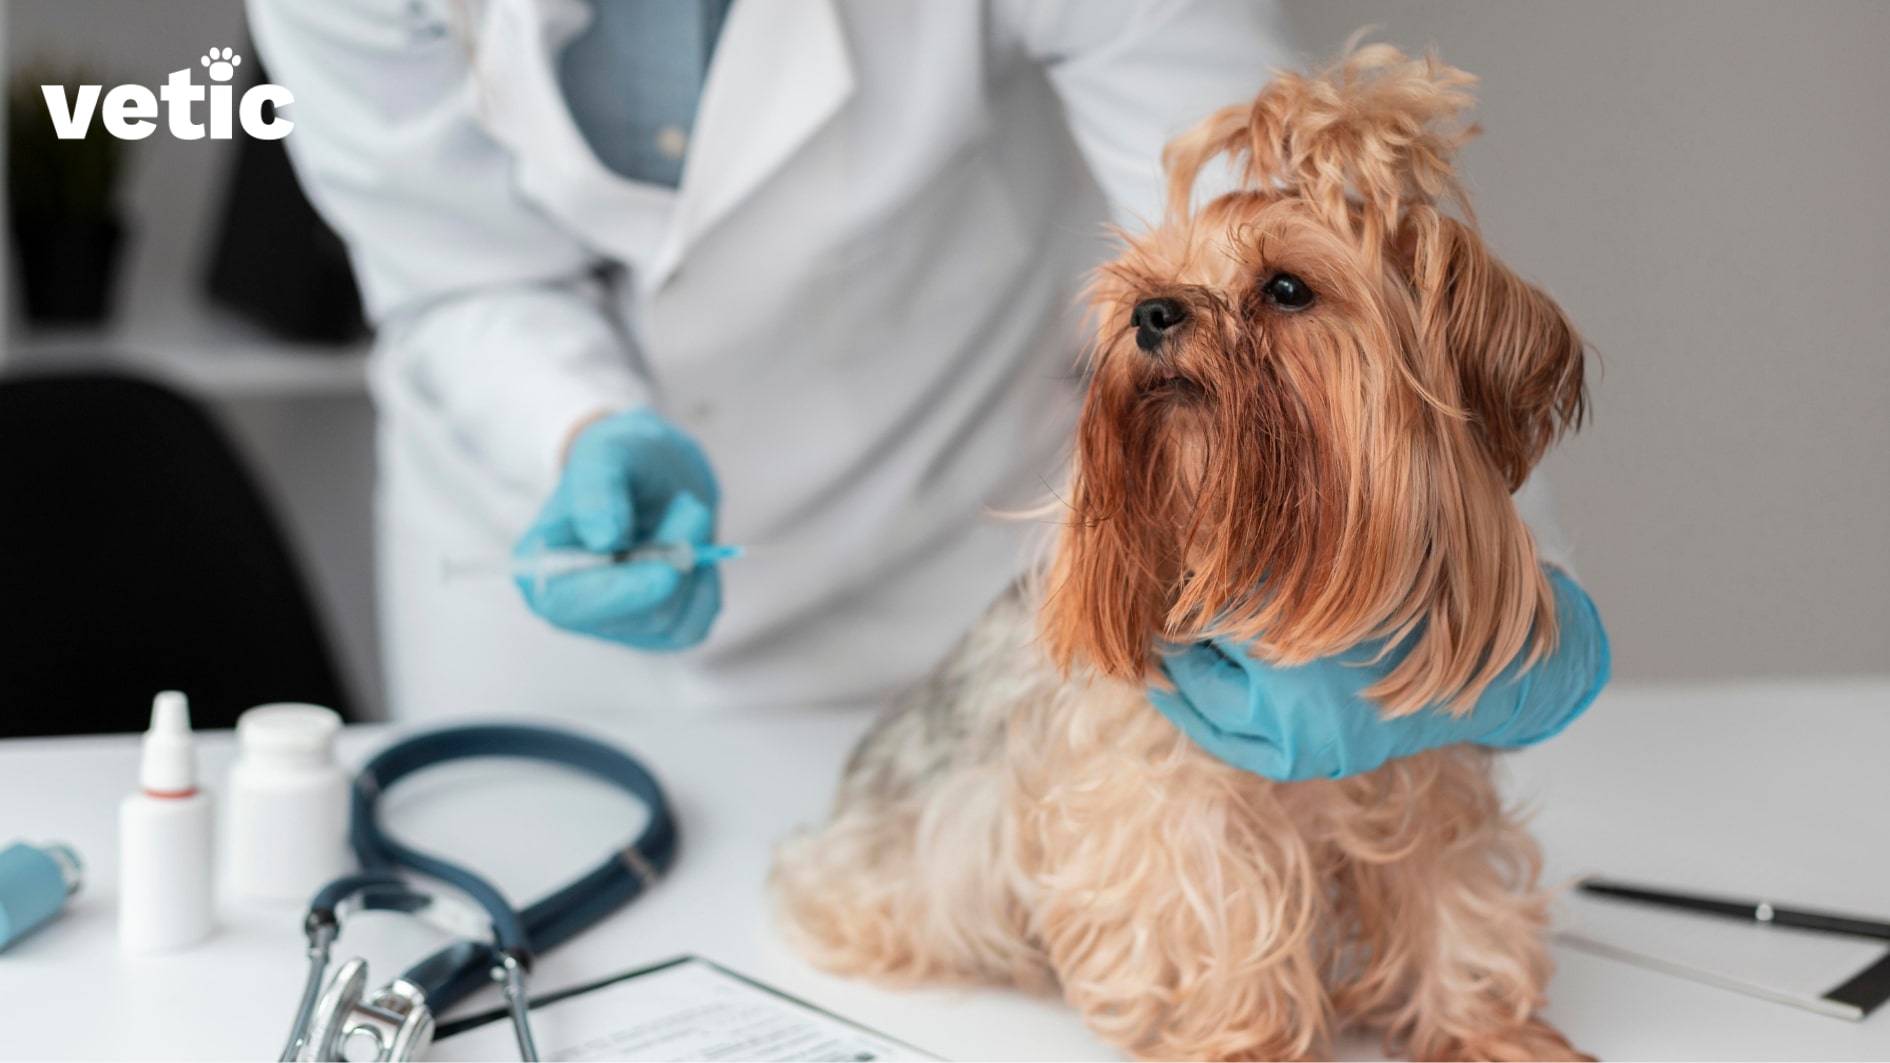 person wearing a white coat holding a Shih Tzu by one gloved hand and holding a syringe in another gloved hand